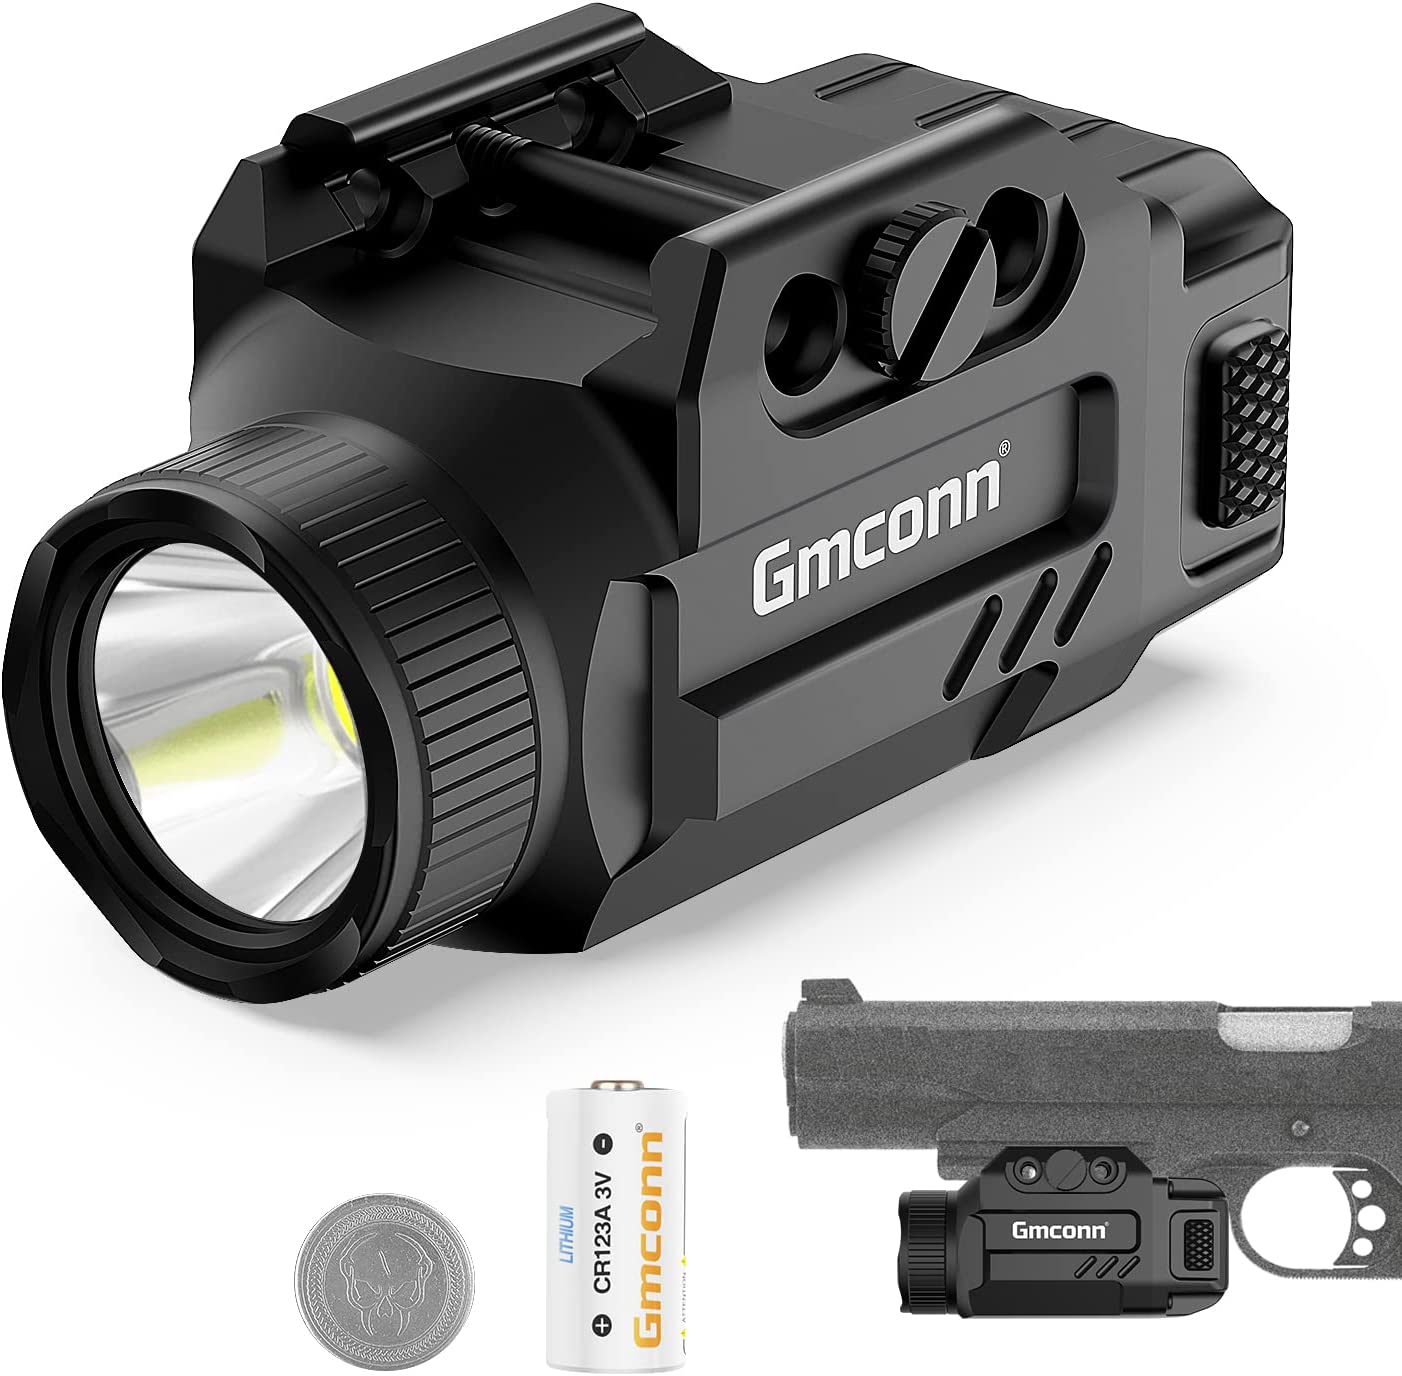 Gmconn Tactical Flashlight Pistol Light Rail Mounted 600 Lumens Small Size Weapon Lights with Strobe Function for Handgun Fits Picatinny MIL-STD-1913 (Black)